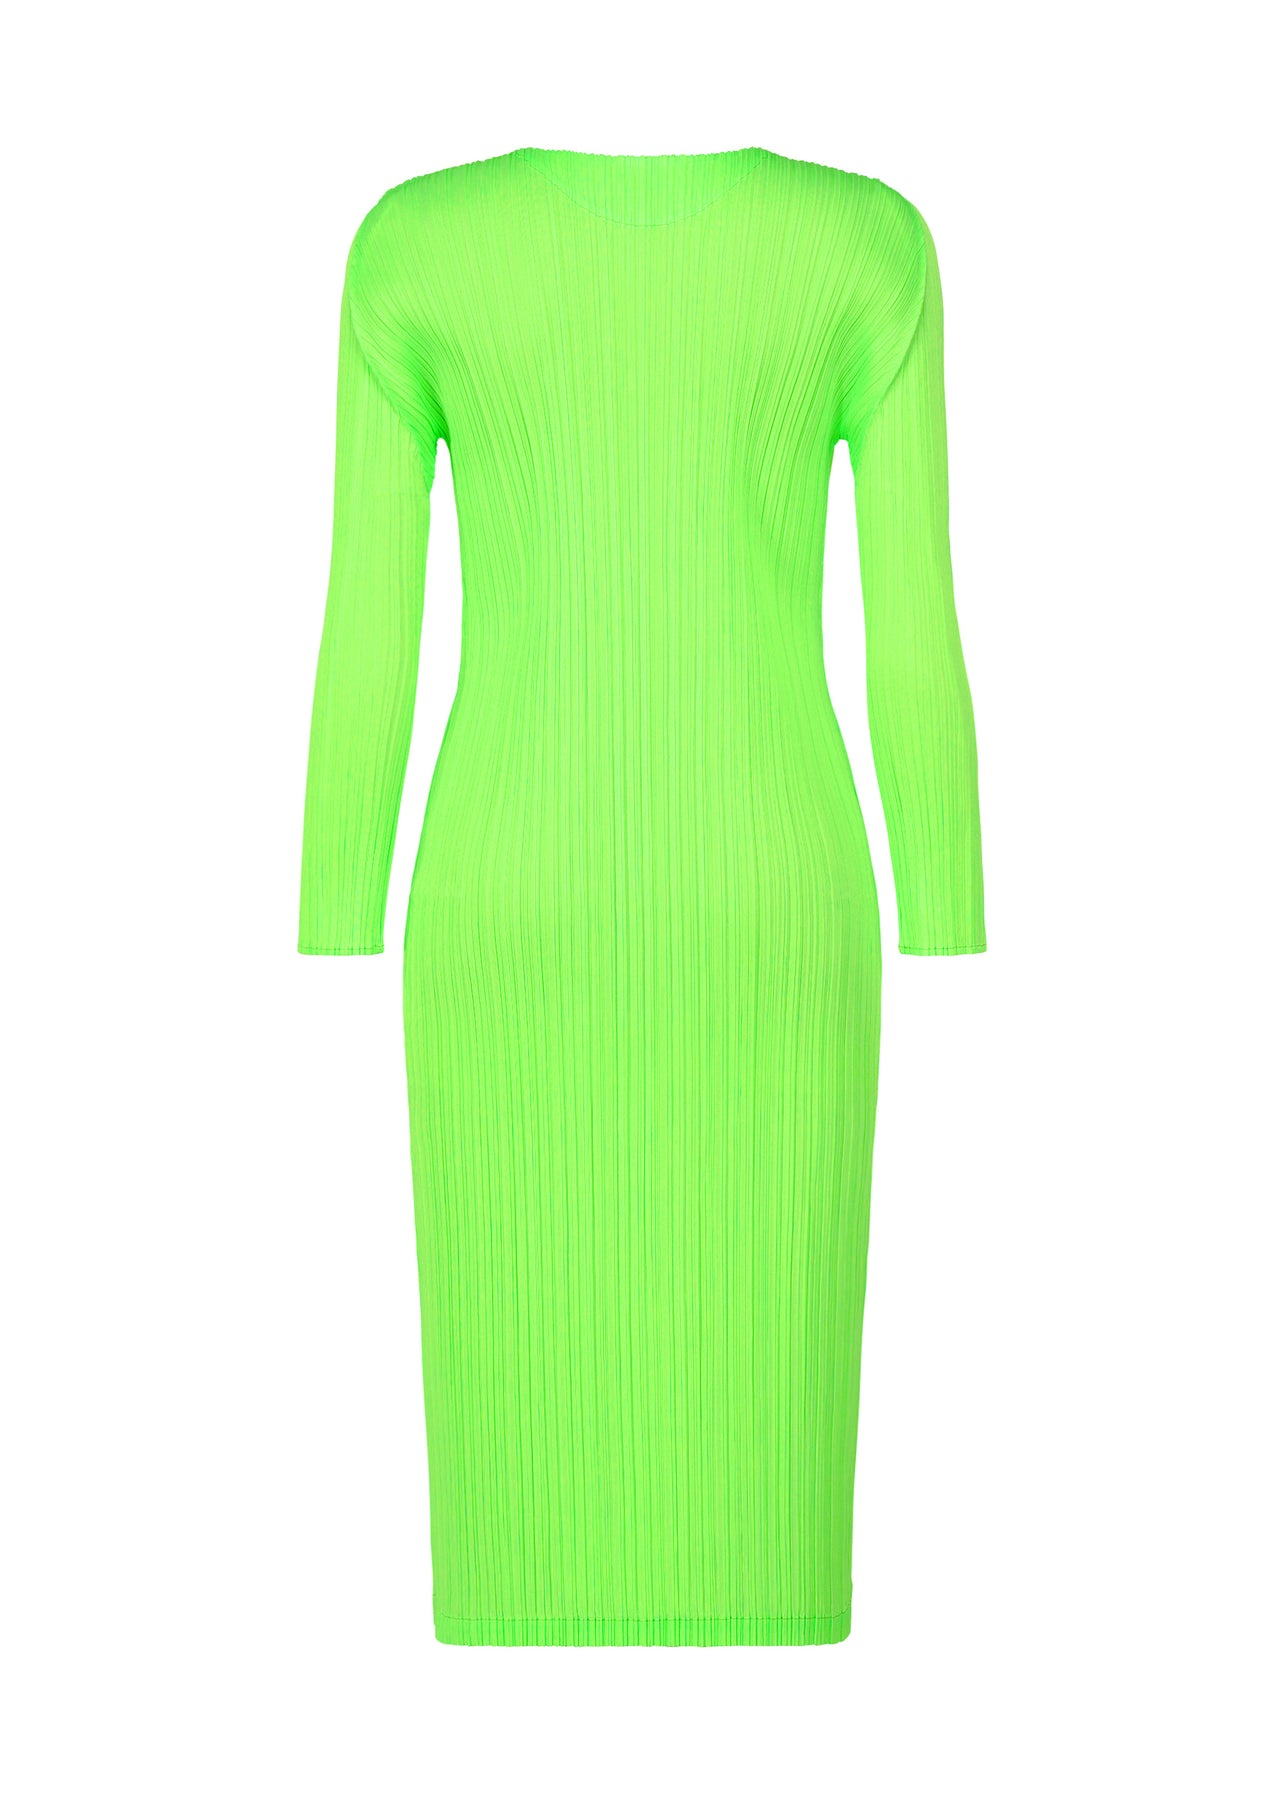 MONTHLY COLORS : SEPTEMBER DRESS | The official ISSEY MIYAKE